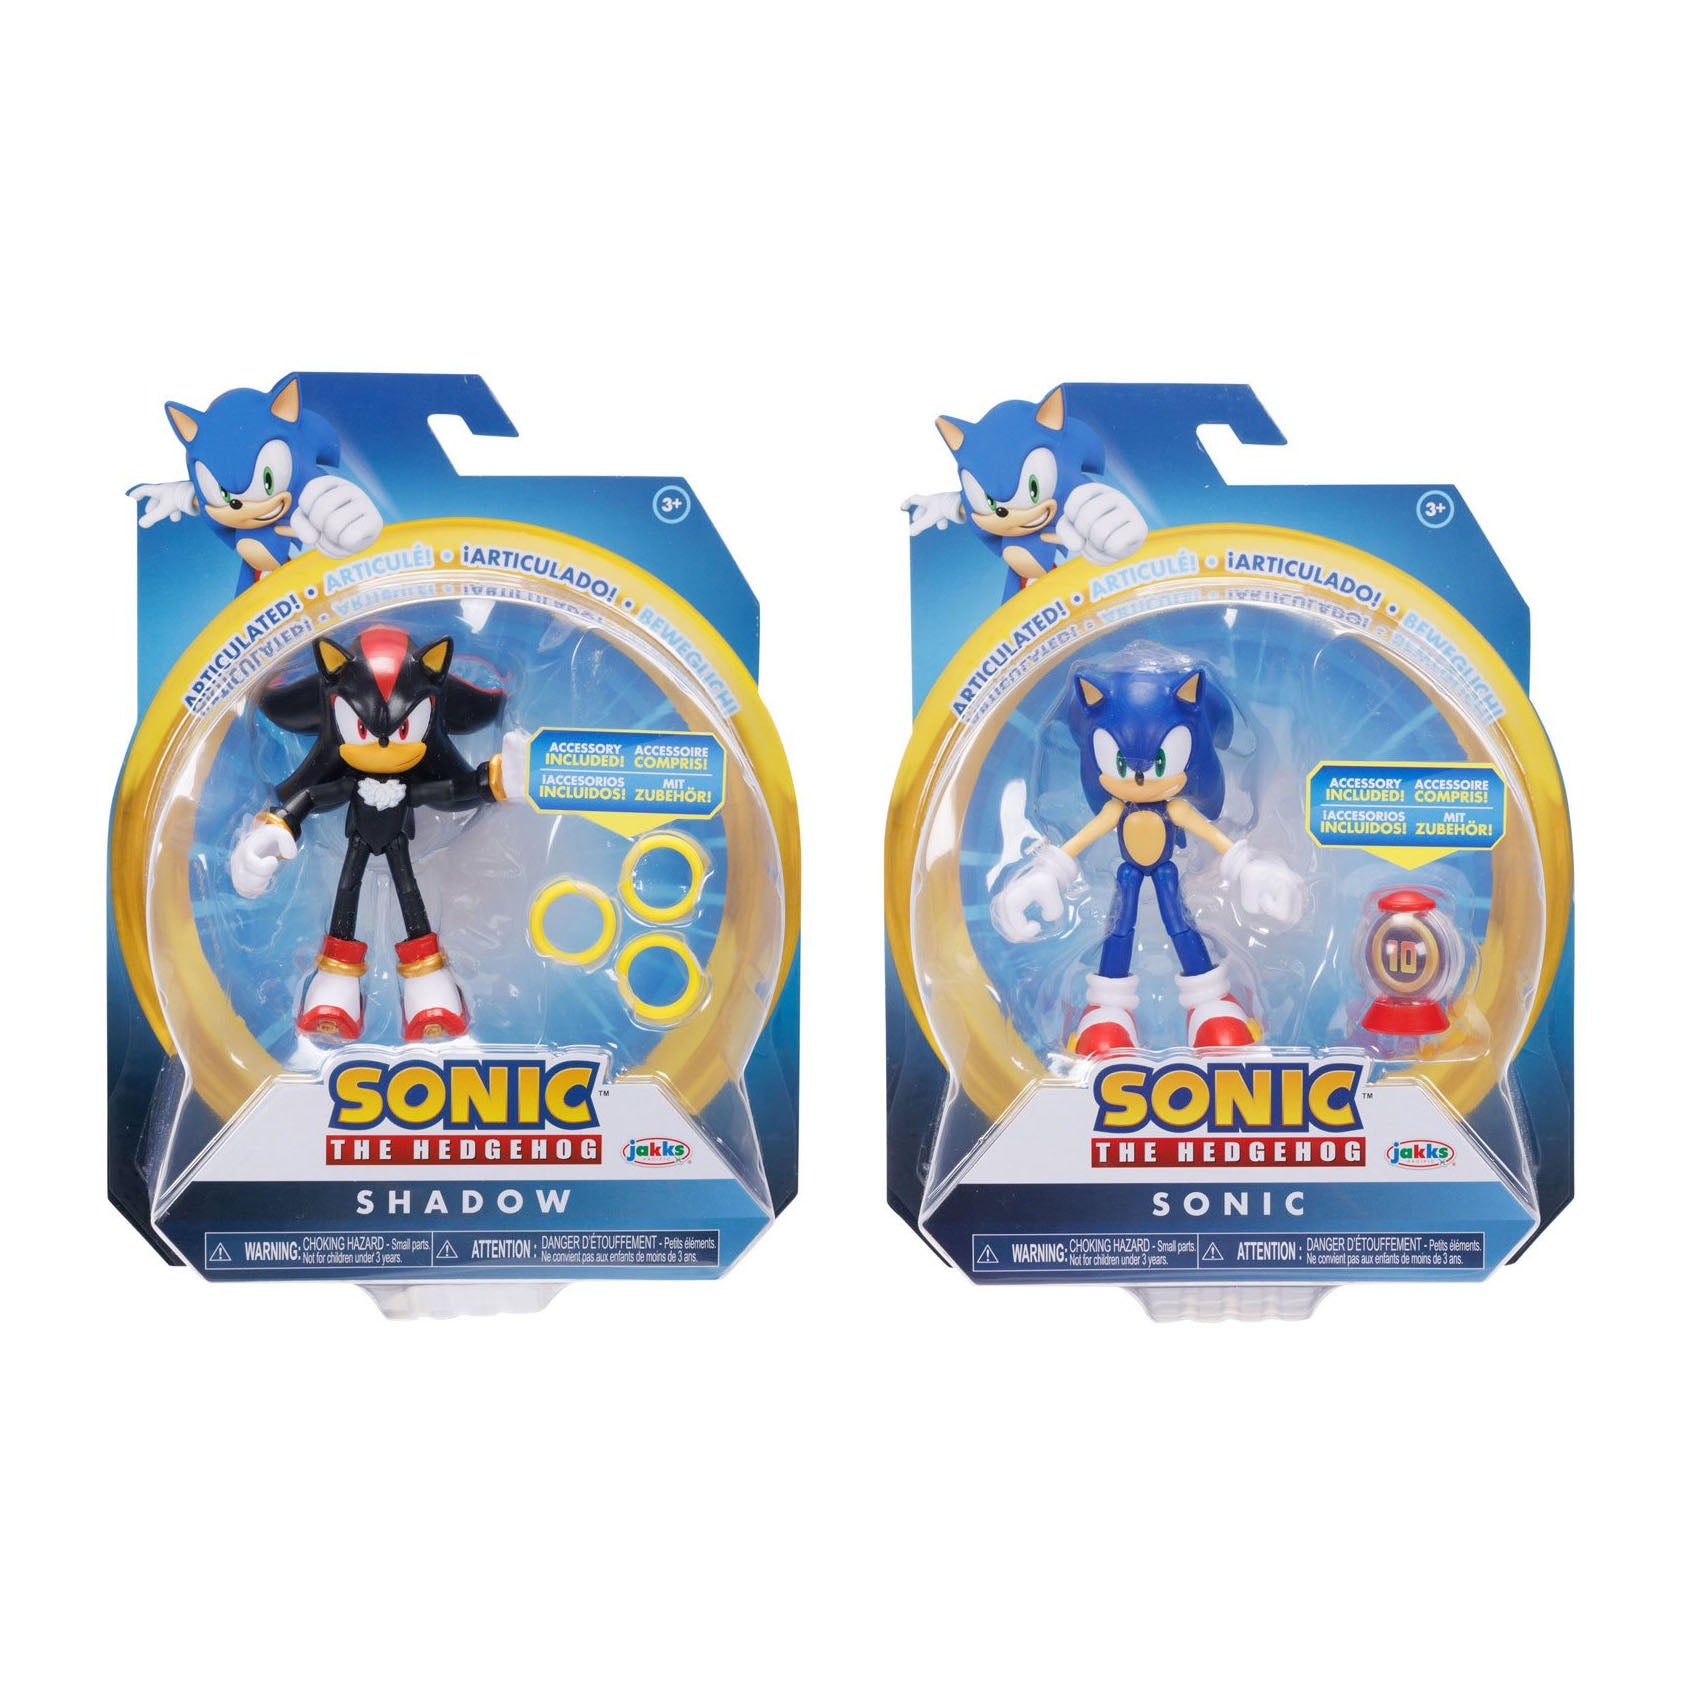  Sonic the Hedgehog 4 Shadow with Rings Action Figure